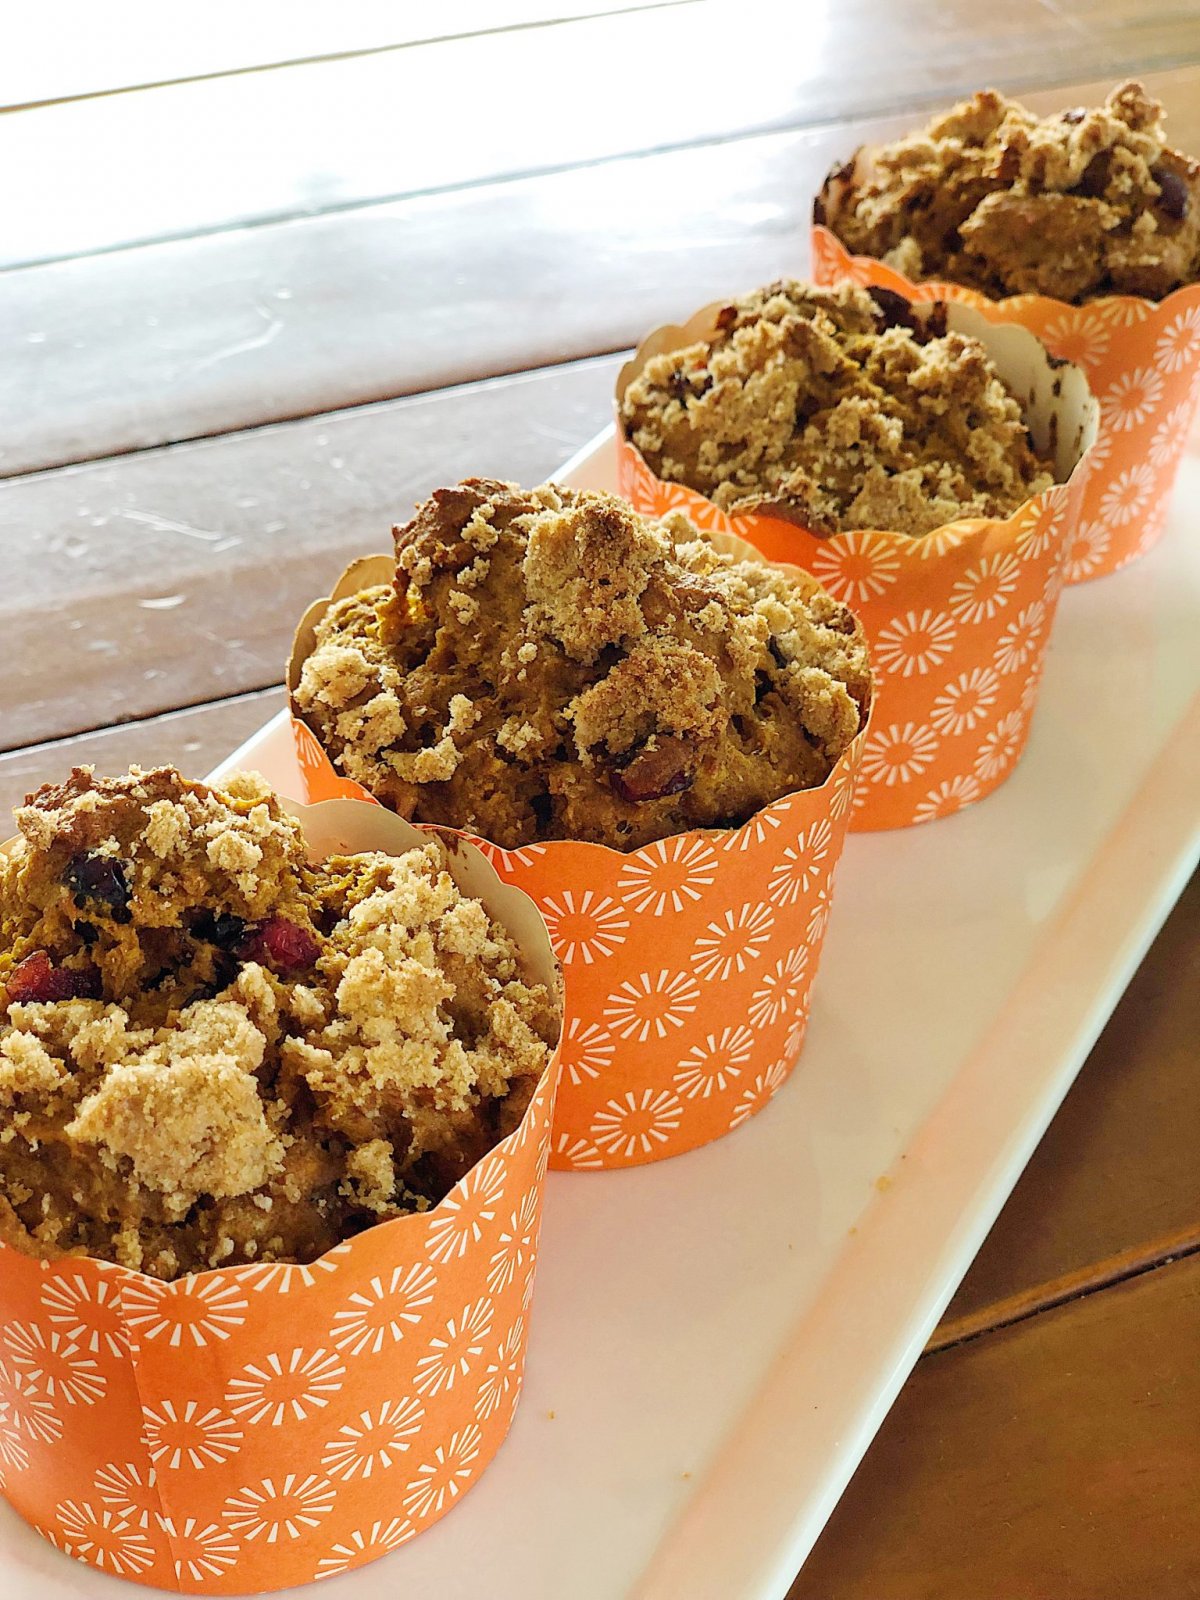 This cranberry pumpkin muffin recipe is so easy to make and the muffins are delicious. Whip up a batch for your family and You Will enjoy these Muffins every day for breakfast.